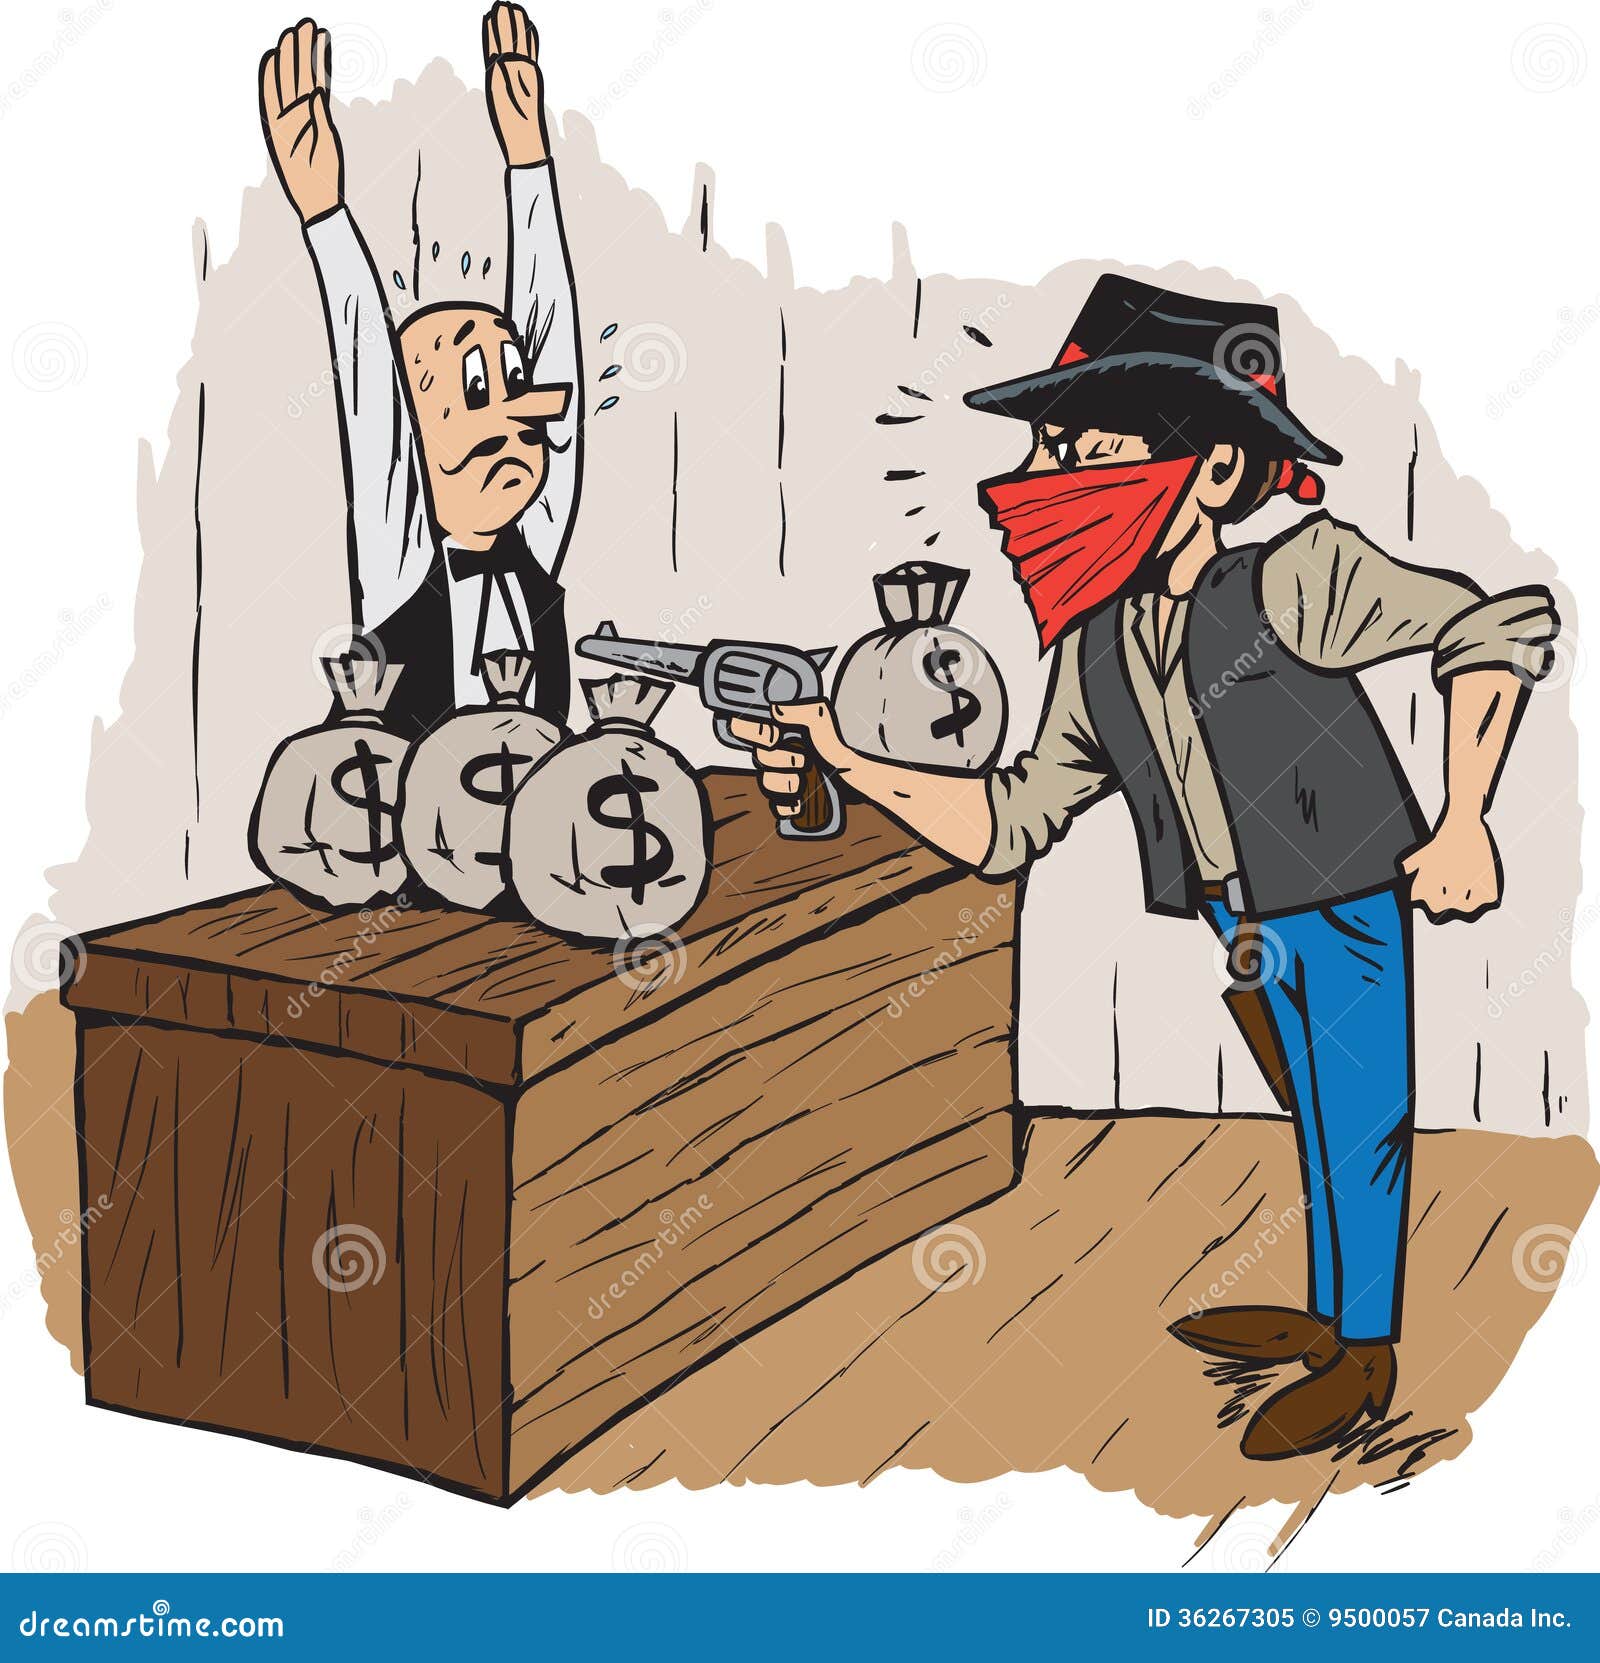 clipart bank robber - photo #11